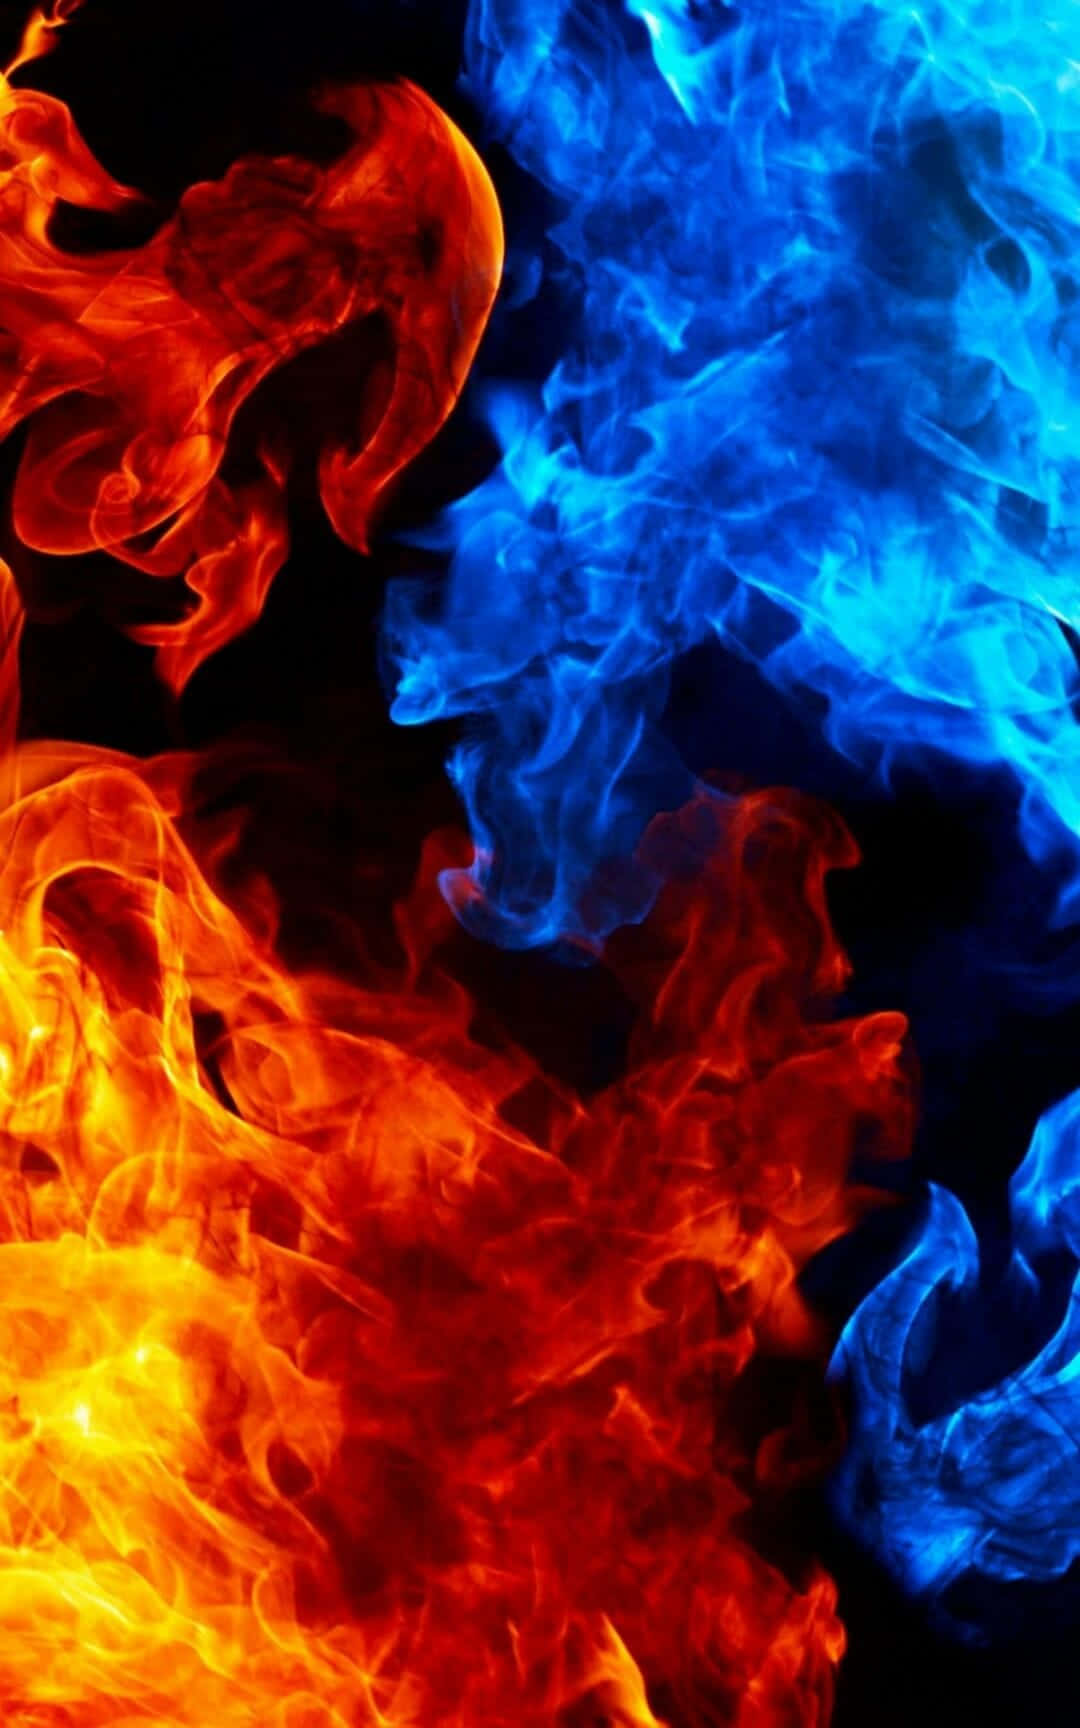 blue flame hd iphone wallpapers